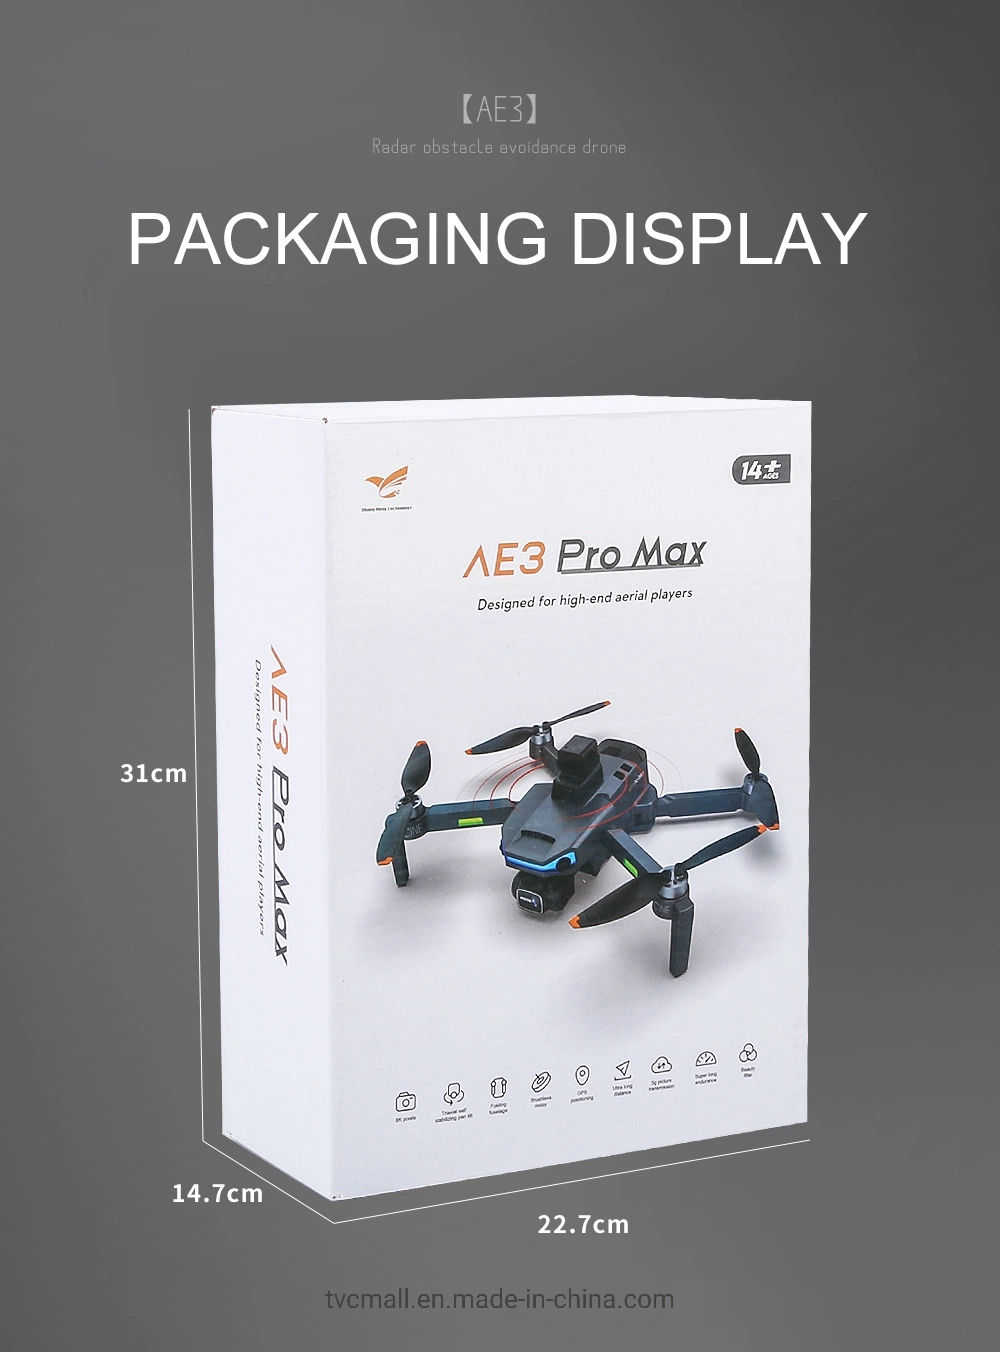 Ae3 GPS Auto Return Drone HD Camera WiFi Fpv 3-Axis Gimbal Radar Obstacle Avoidance Anti-Shake Quadcopter RC Toy